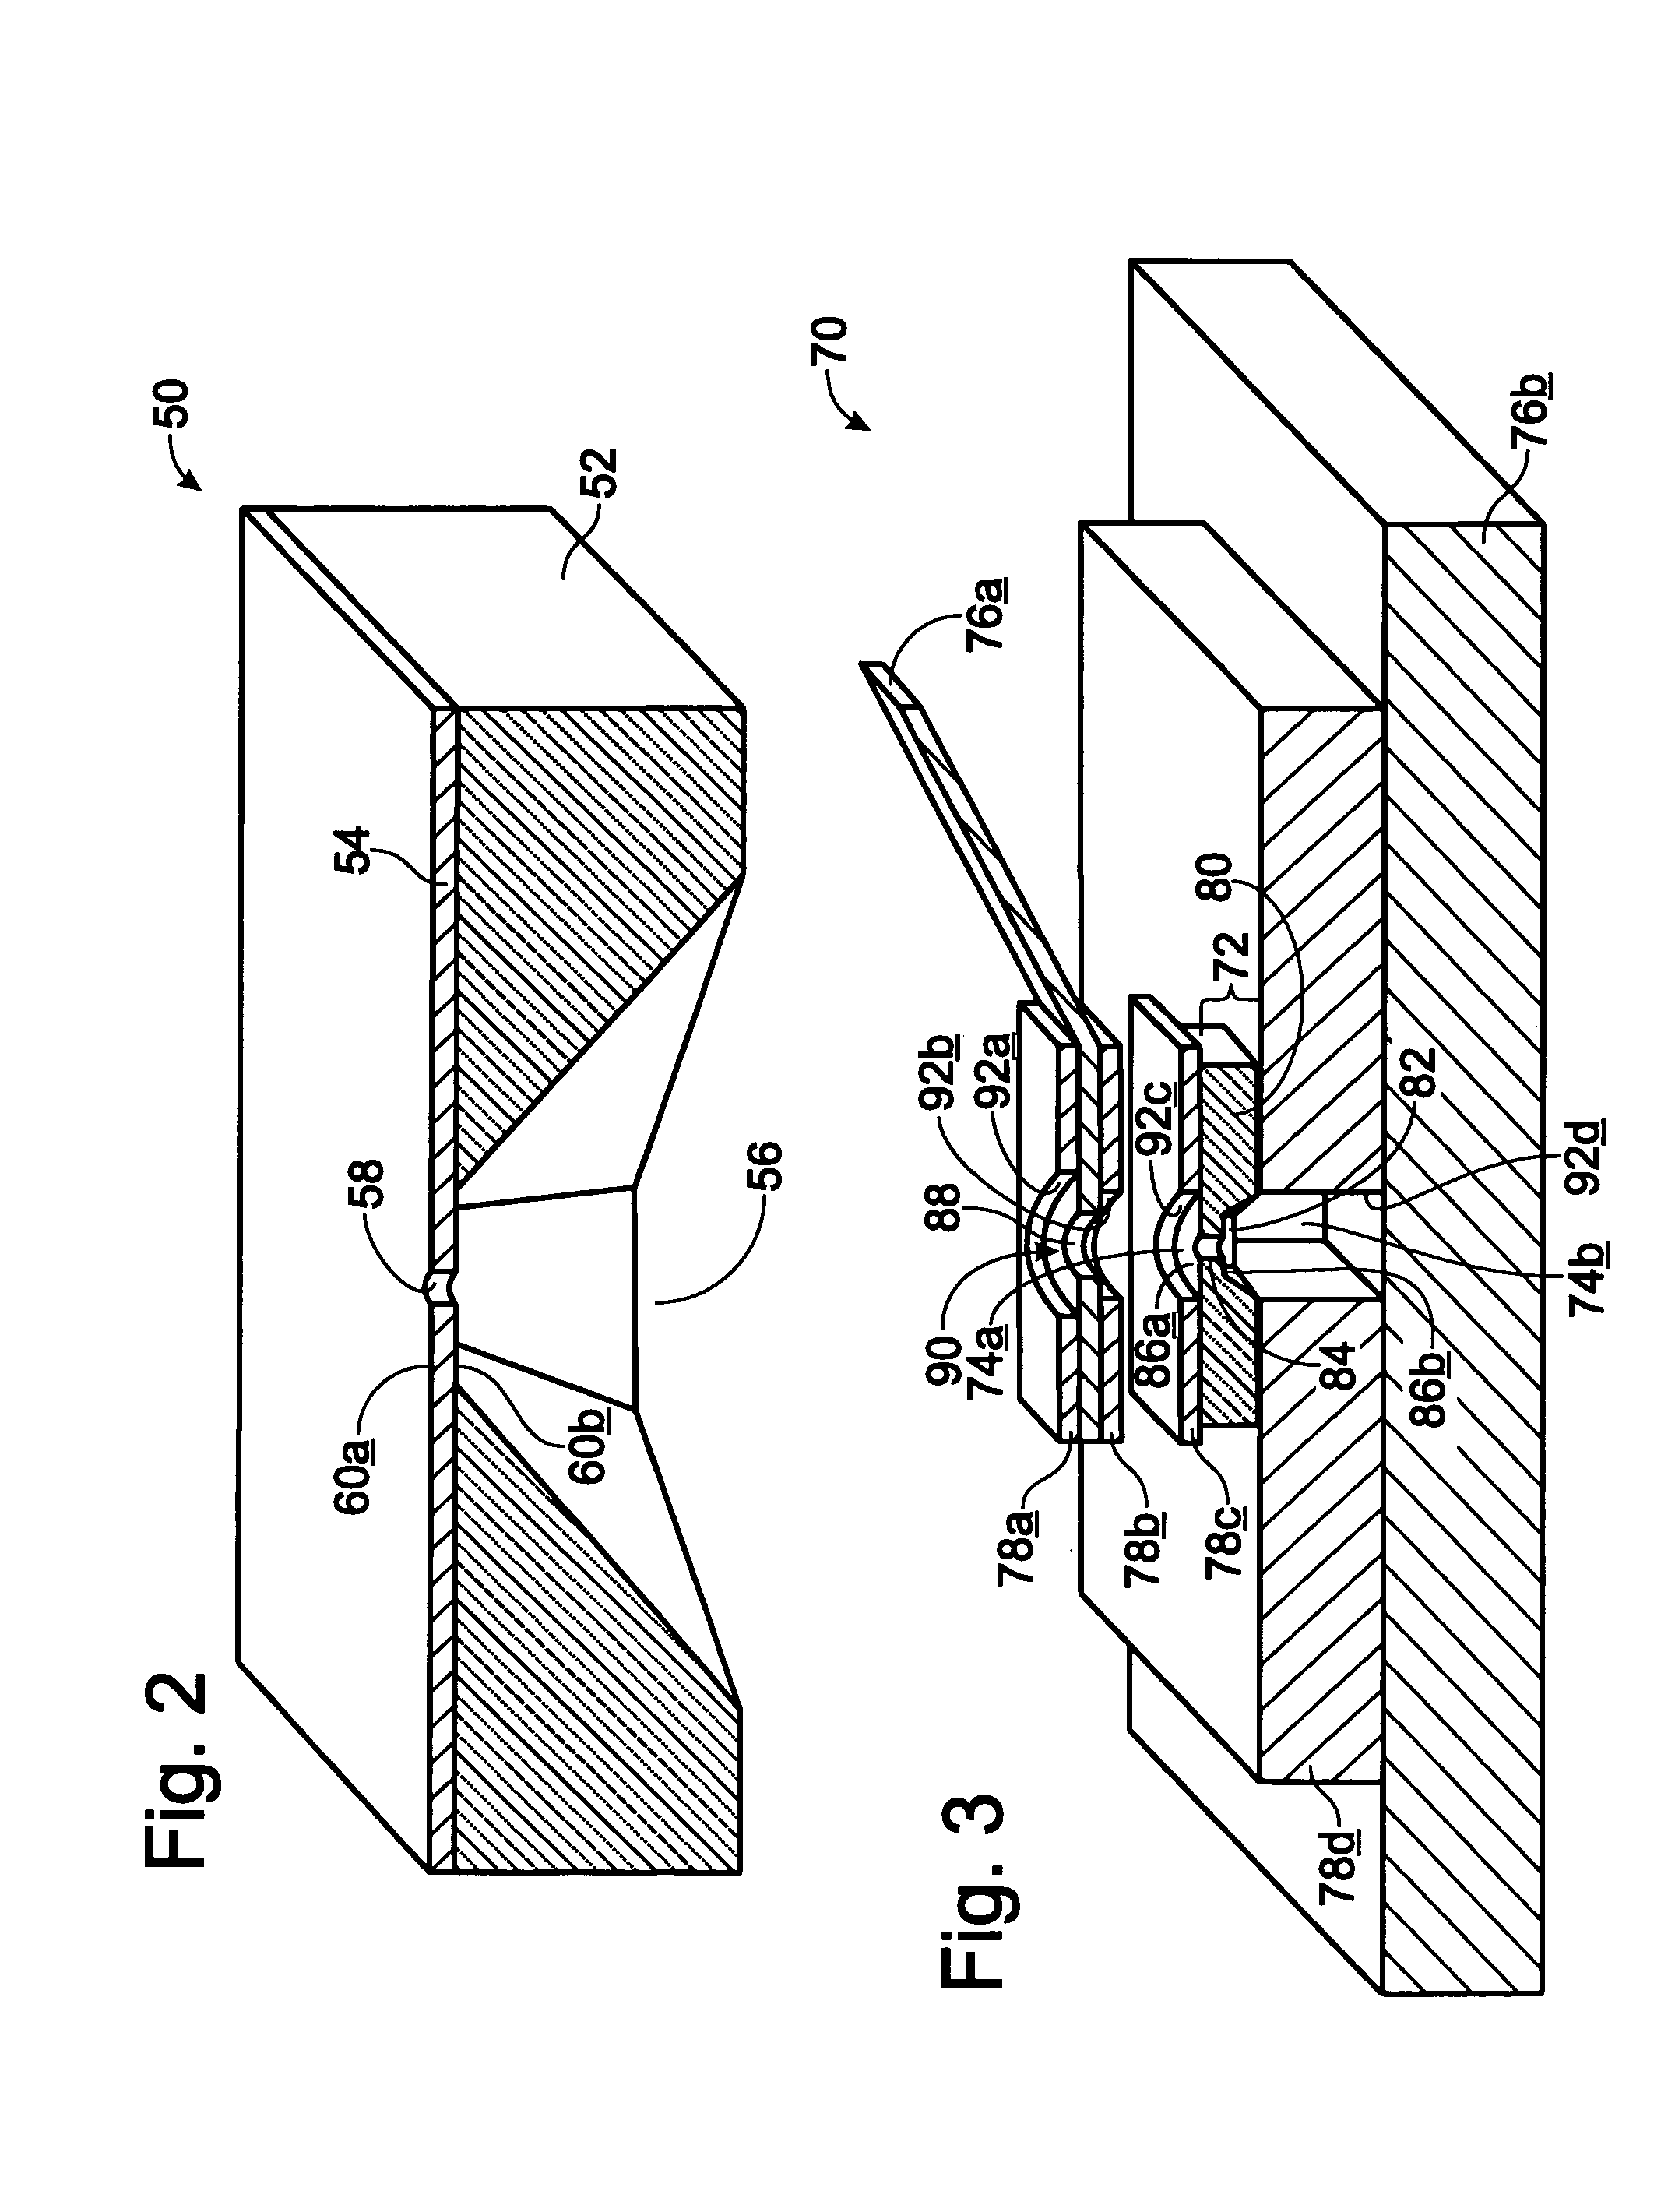 Multiaperture sample positioning and analysis system